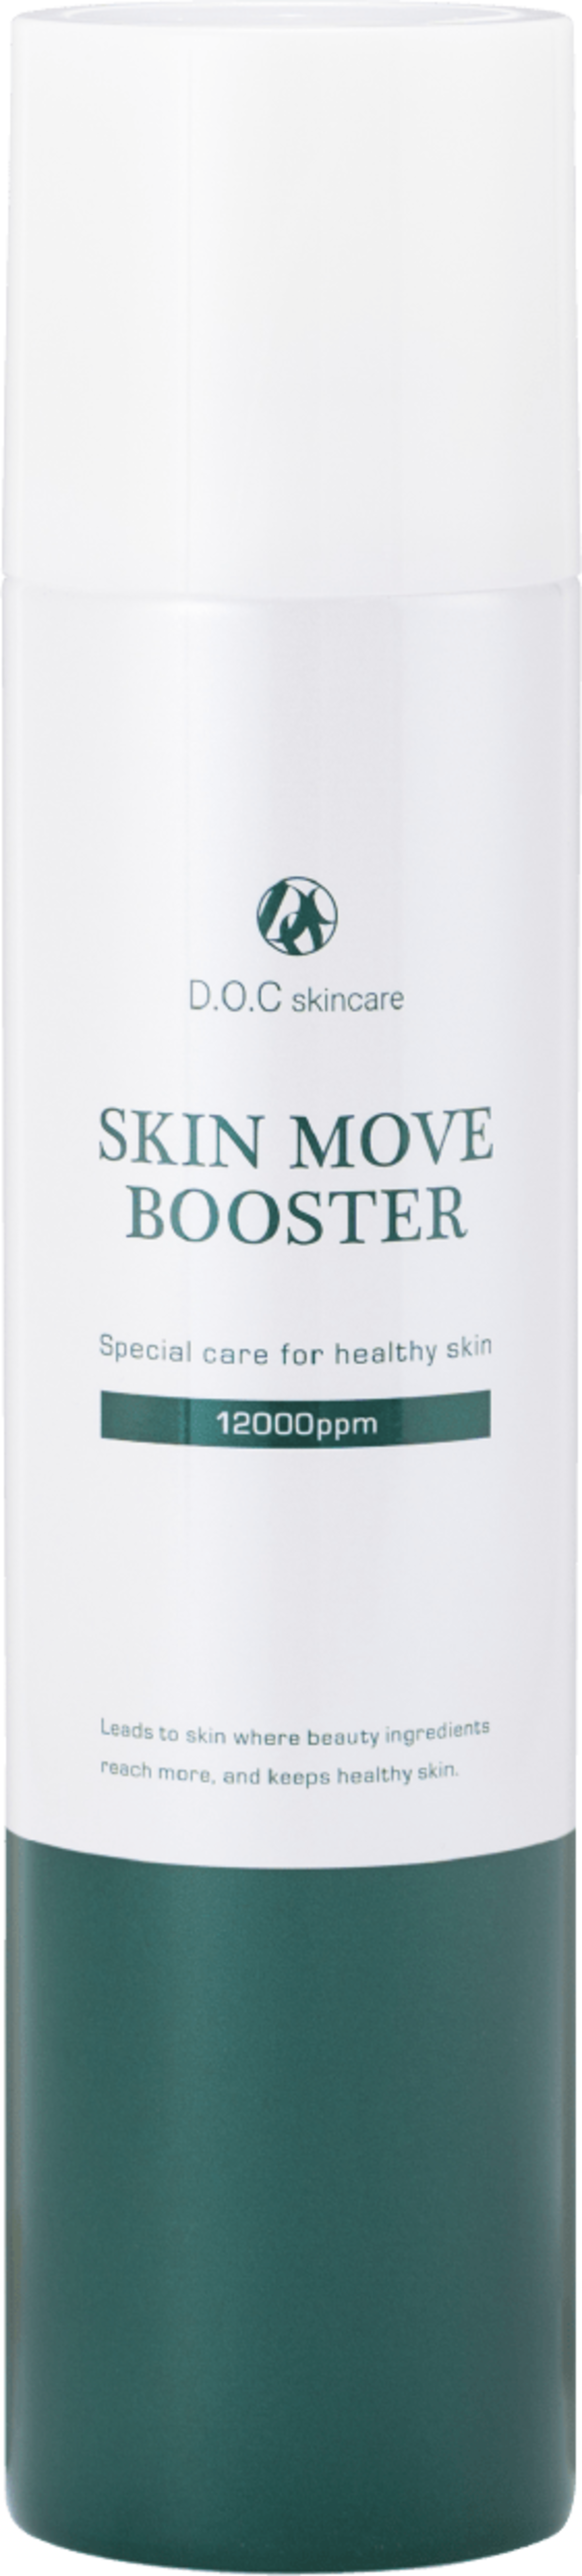 【D.O.C skincare】 SKIN MOVE BOOSTER／スキン ムーブ ...